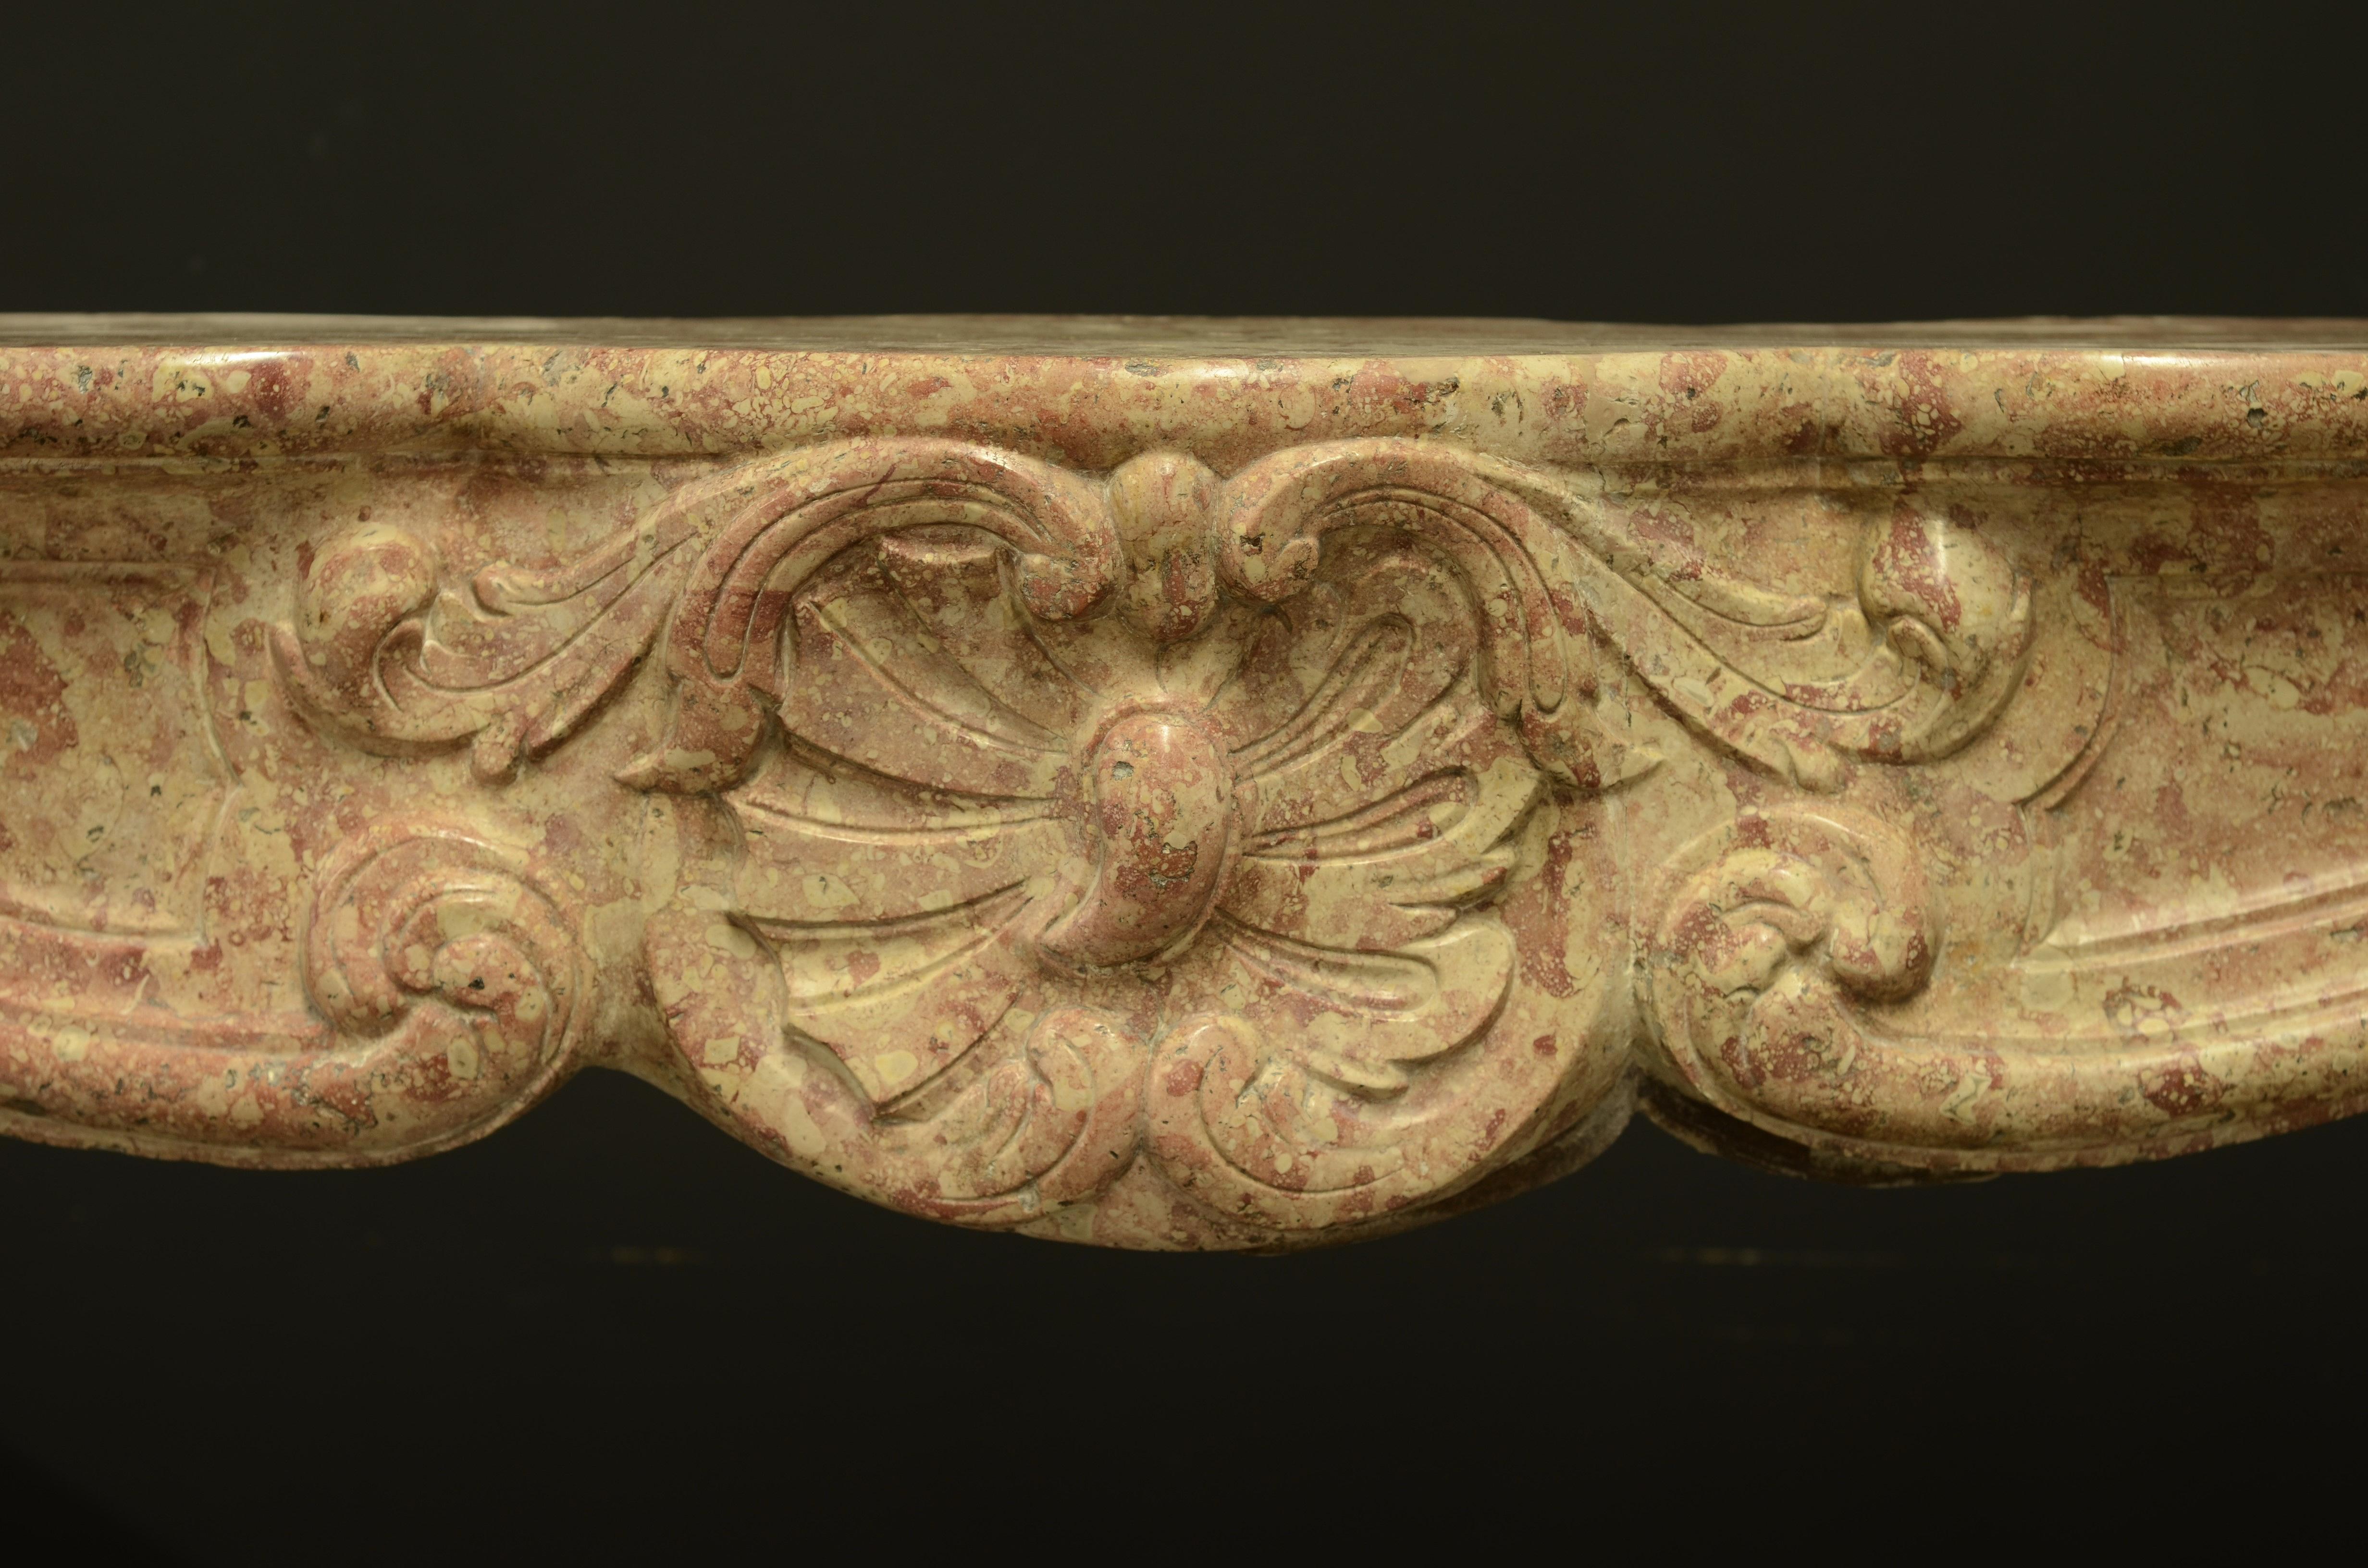 A nice warm colored and decorative early 19th century French Louis XV fireplace mantel.
Opening dimensions: 
Highest height: 38.58 inch or 98 cm 
Lowest height: 35.82 inch or 91 cm
Width: 51.18 inch or 130 cm

Has been restored.

Ready to be shipped